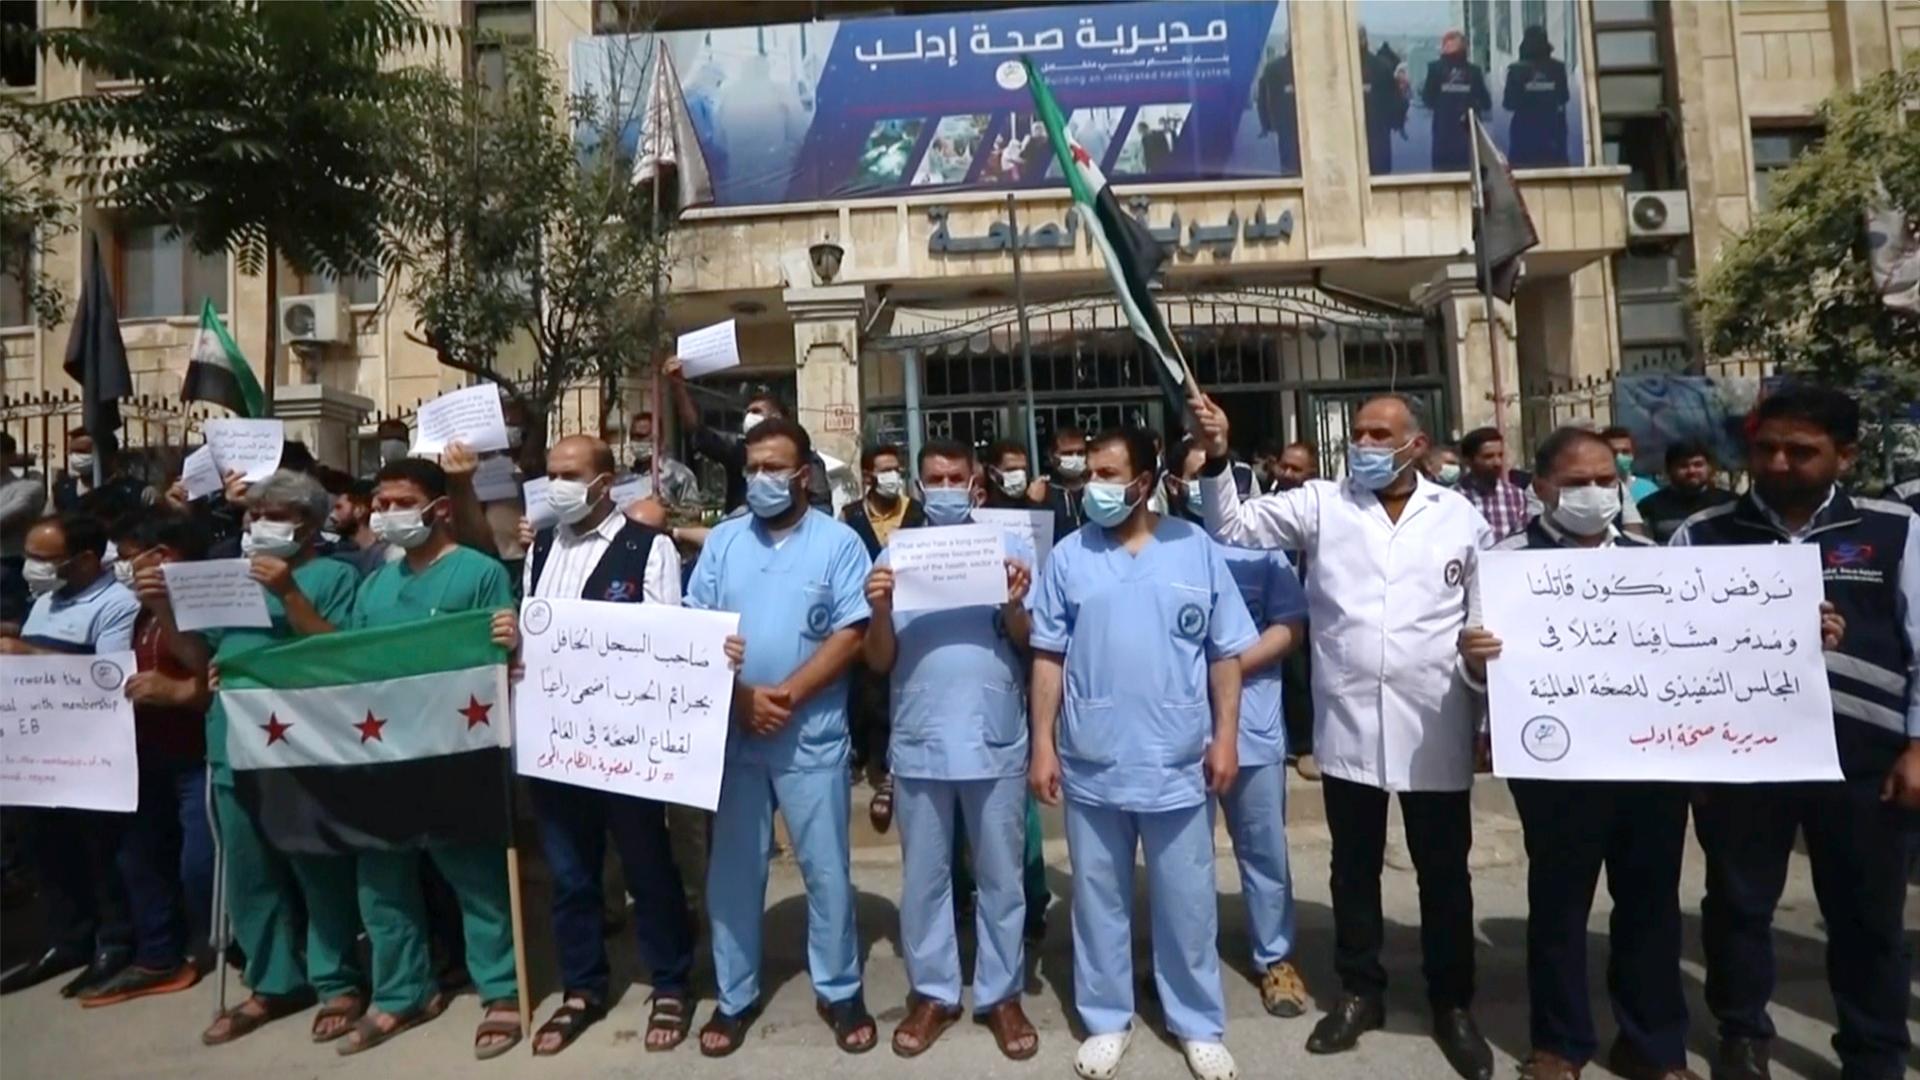 In this image taken from video, dozens of medical workers protest a decision to grant Syrian President Bashar al-Assad’s government a seat on the executive board of the World Health Organization, May 31, 2021, in Idlib, Syria.